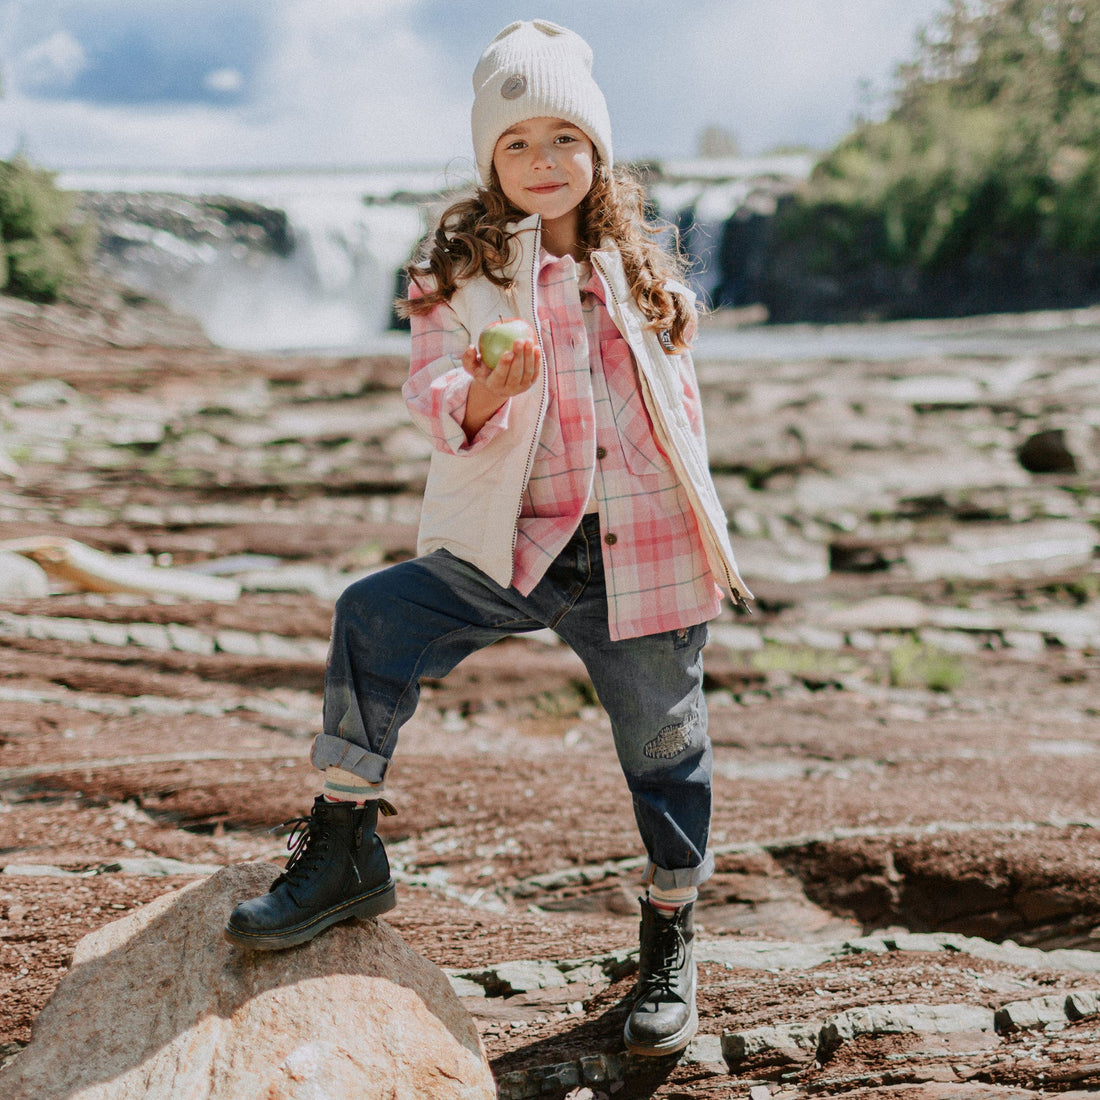 PINK PLAID SHIRT IN FLANNEL, CHILD